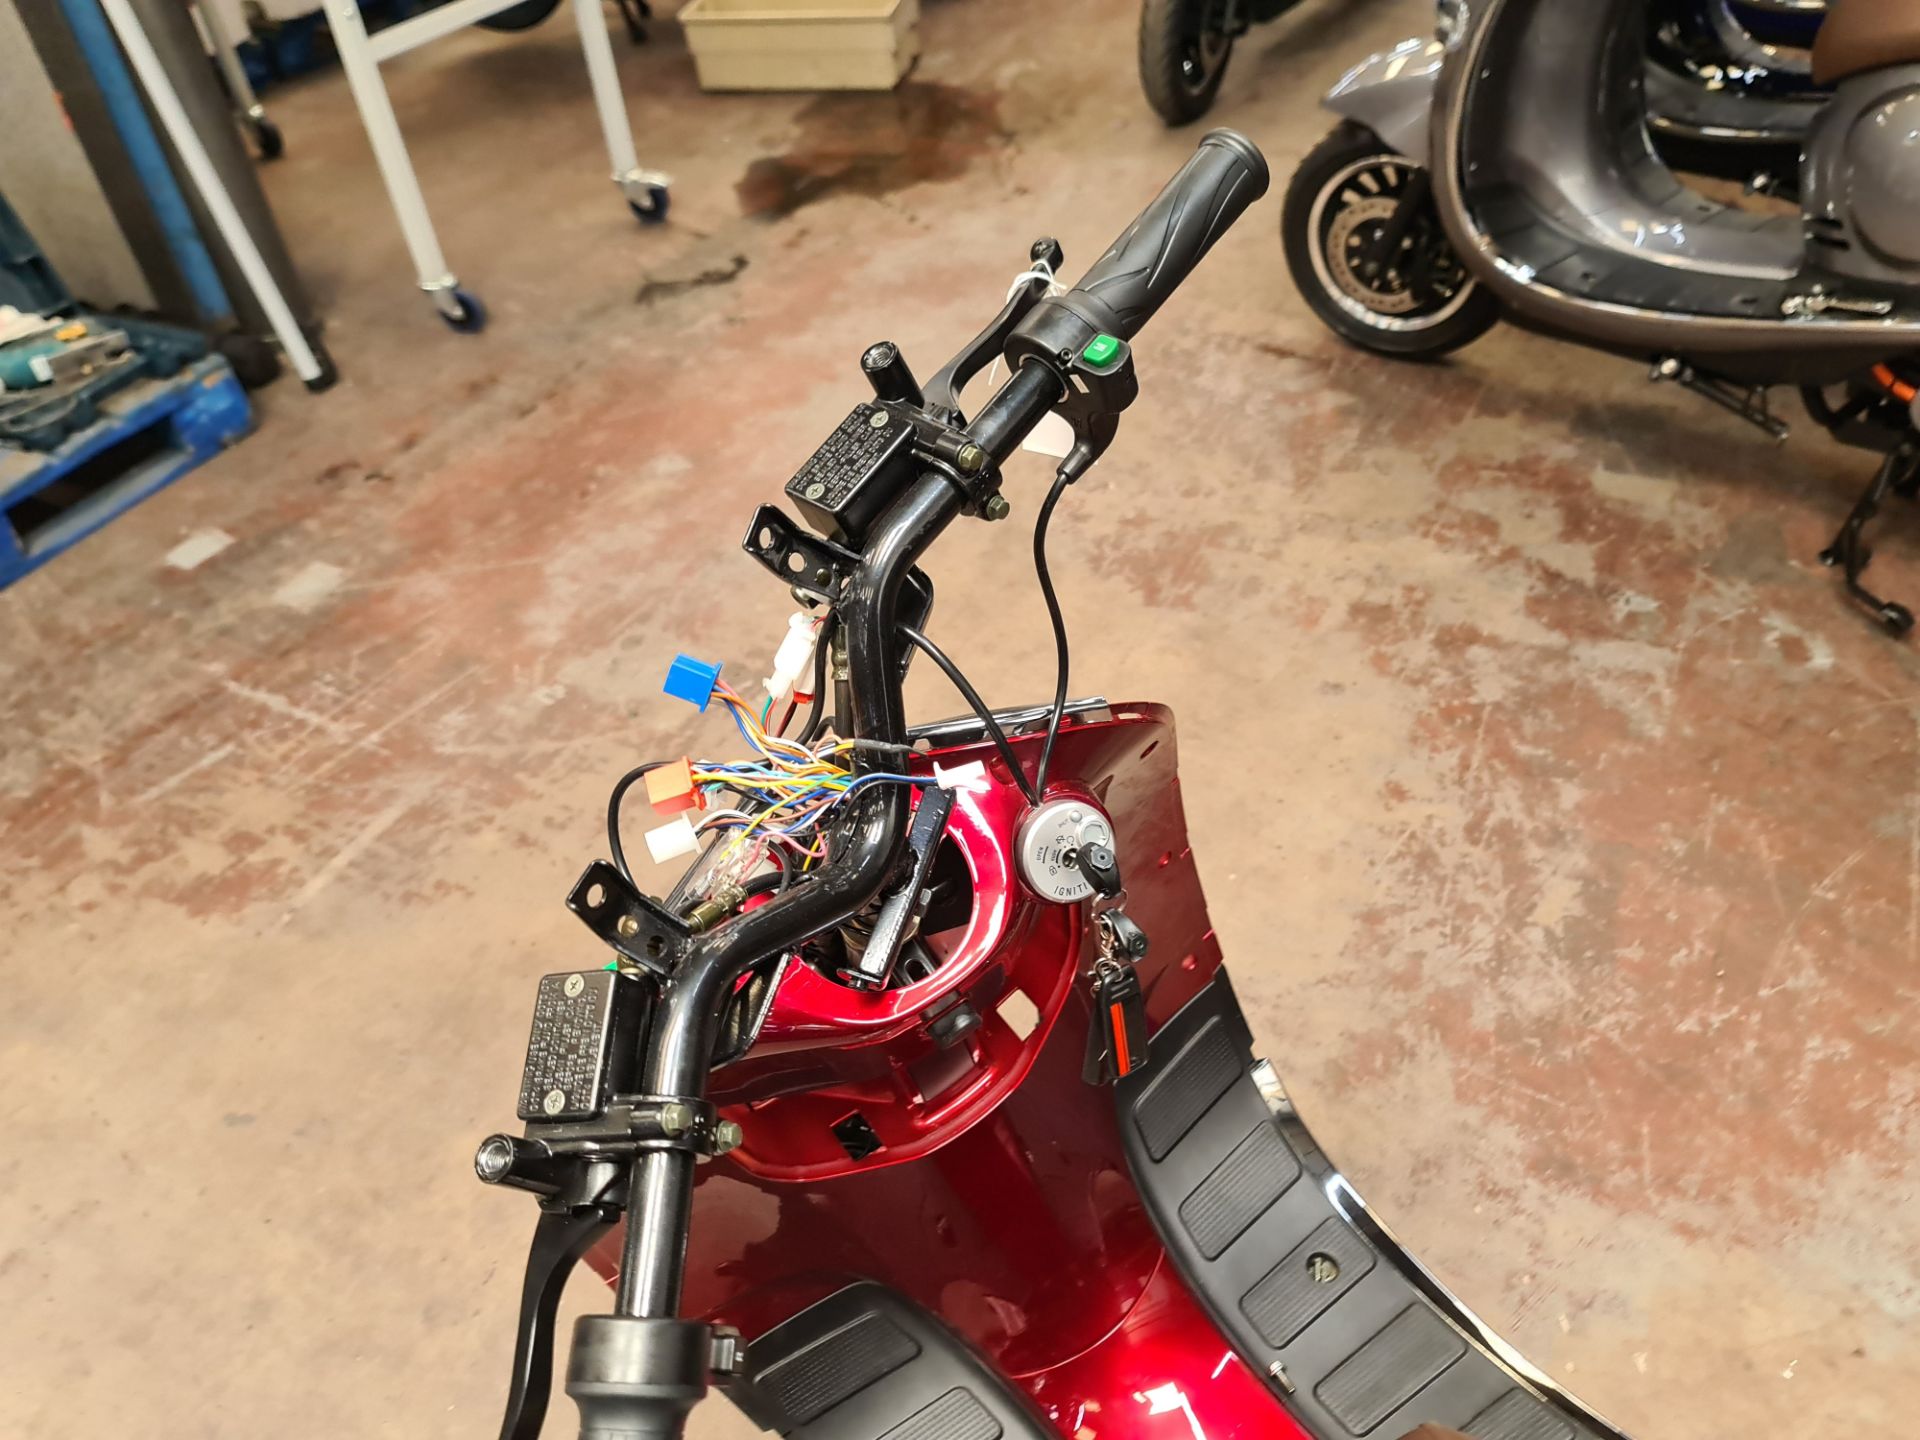 Ultra 5000 electric scooter, Non-runner. Colour: red, 125cc equivalent, 60mph top speed, 60 mile ran - Image 23 of 24